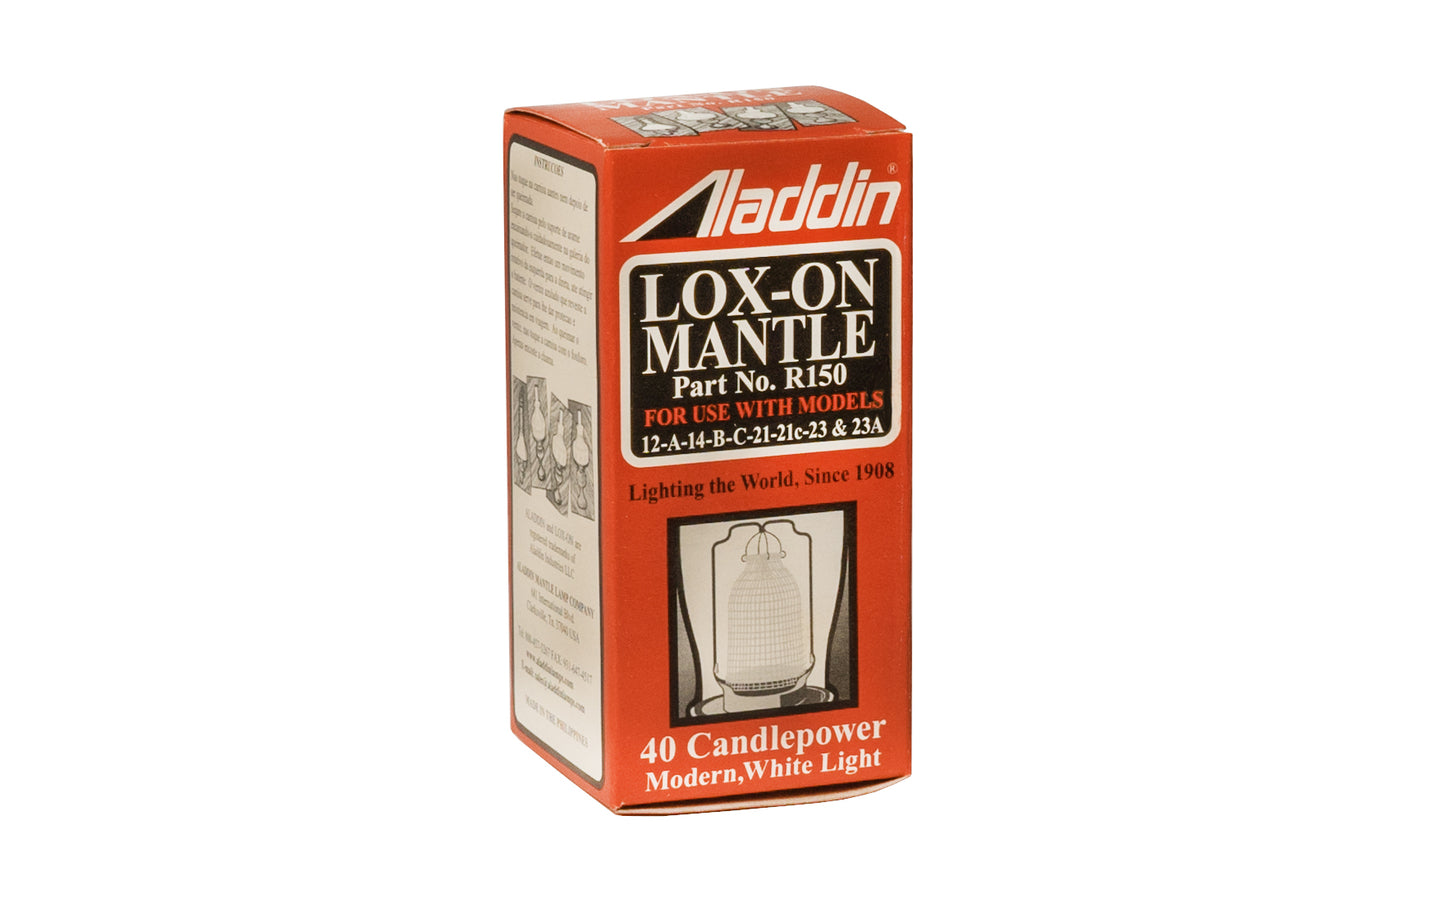 Aladdin Lox-On Mantle ~ R150 This quality 'Lox-On Mantle' fits any Aladdin lamp with a glass base or a metal base with no center air tube. Equal to a 40 W bulb.